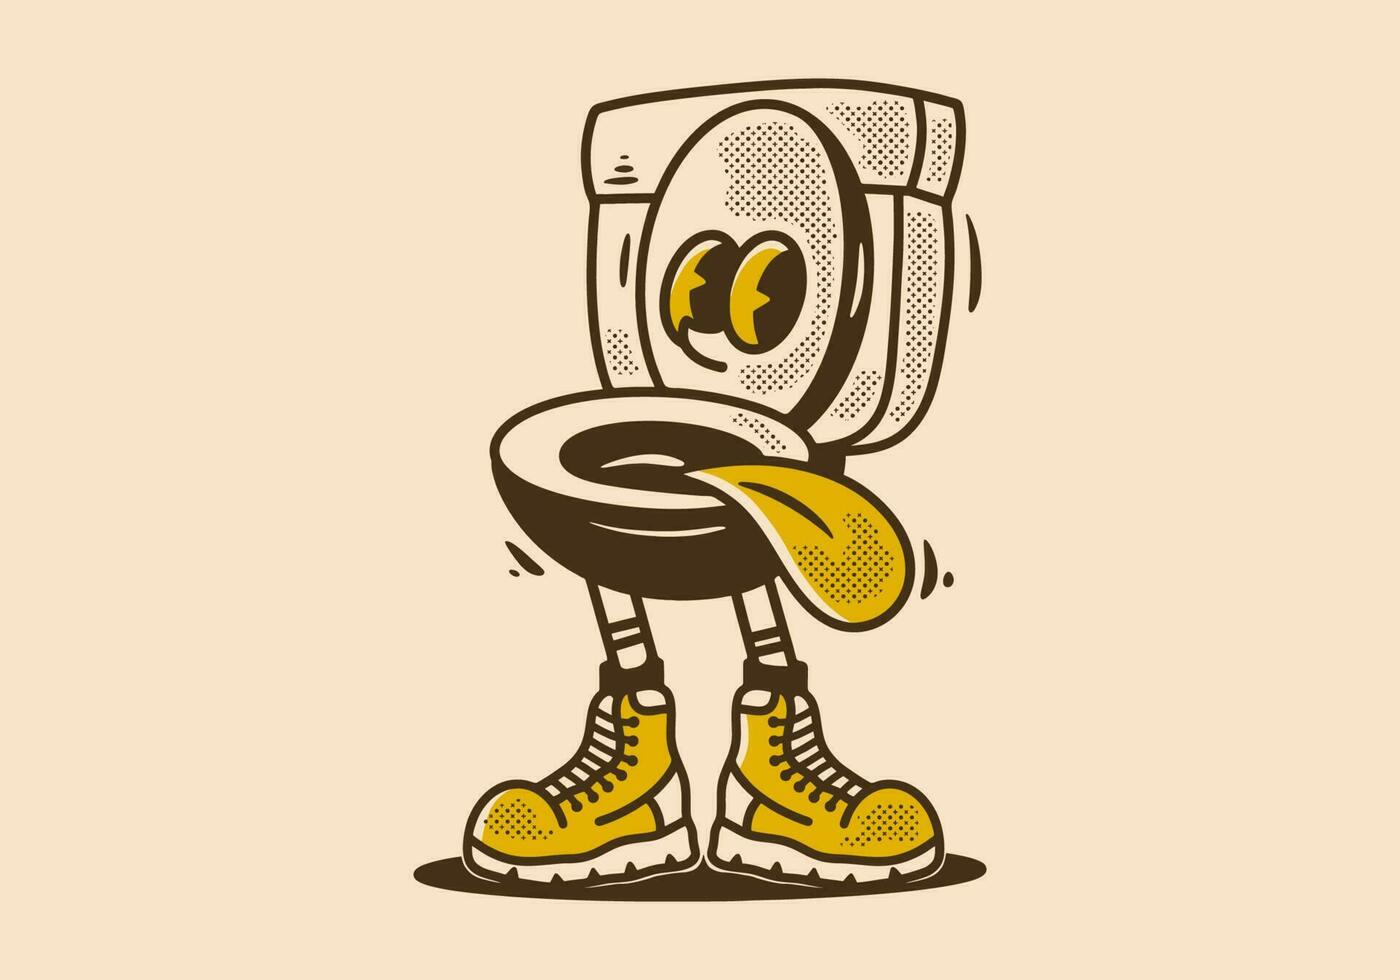 Mascot character illustration of a toilet in a vintage style vector